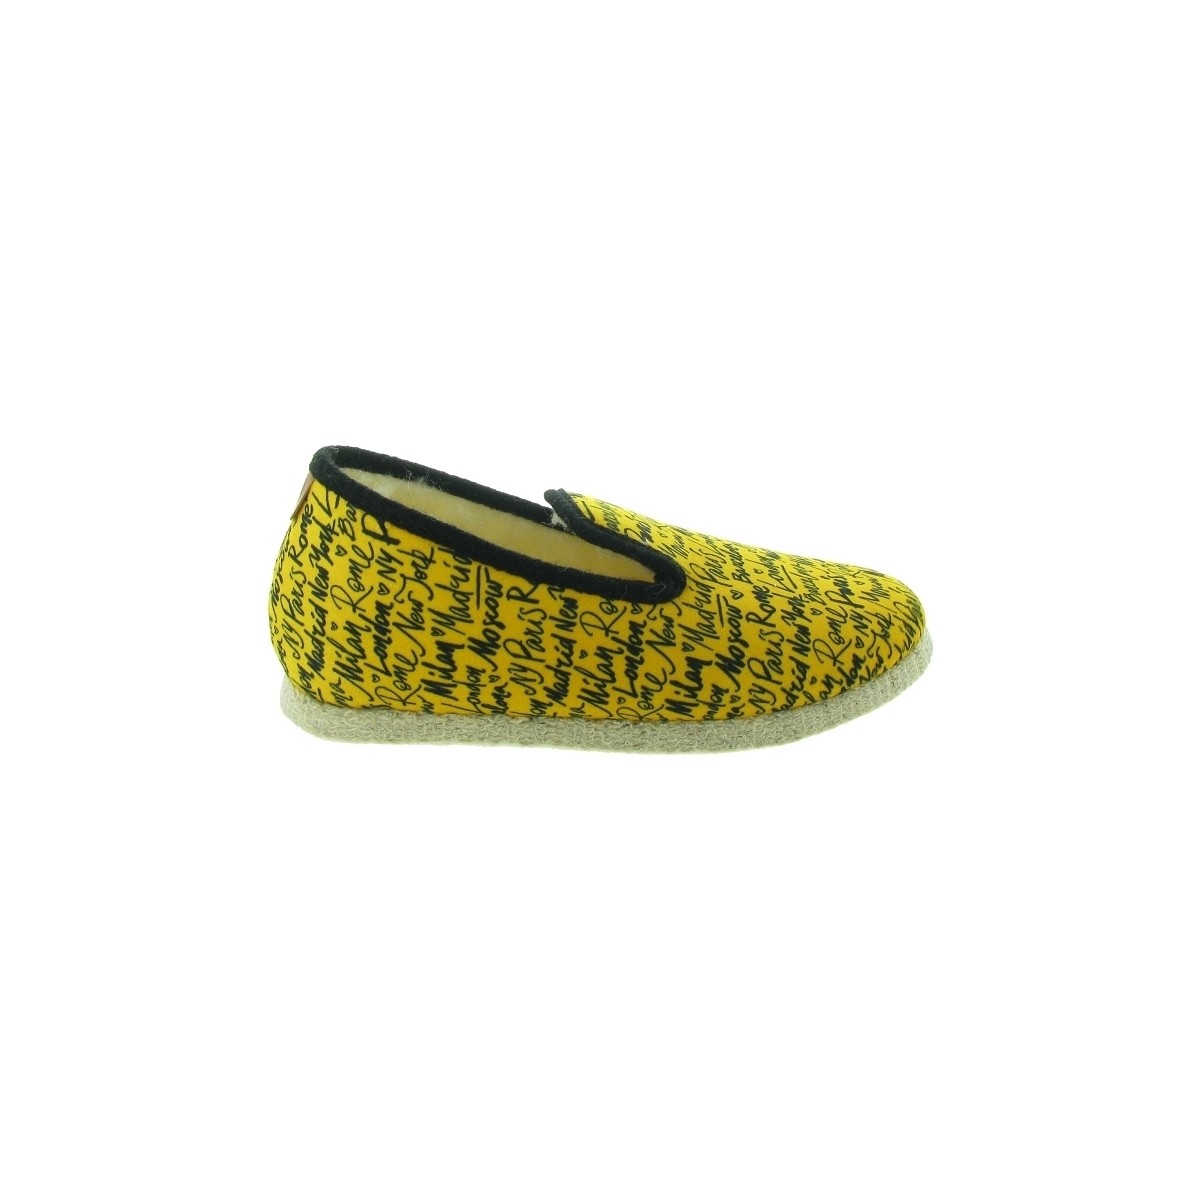 Chaussures Femme Chaussons Chausse Mouton MESSAGE CITY Jaune